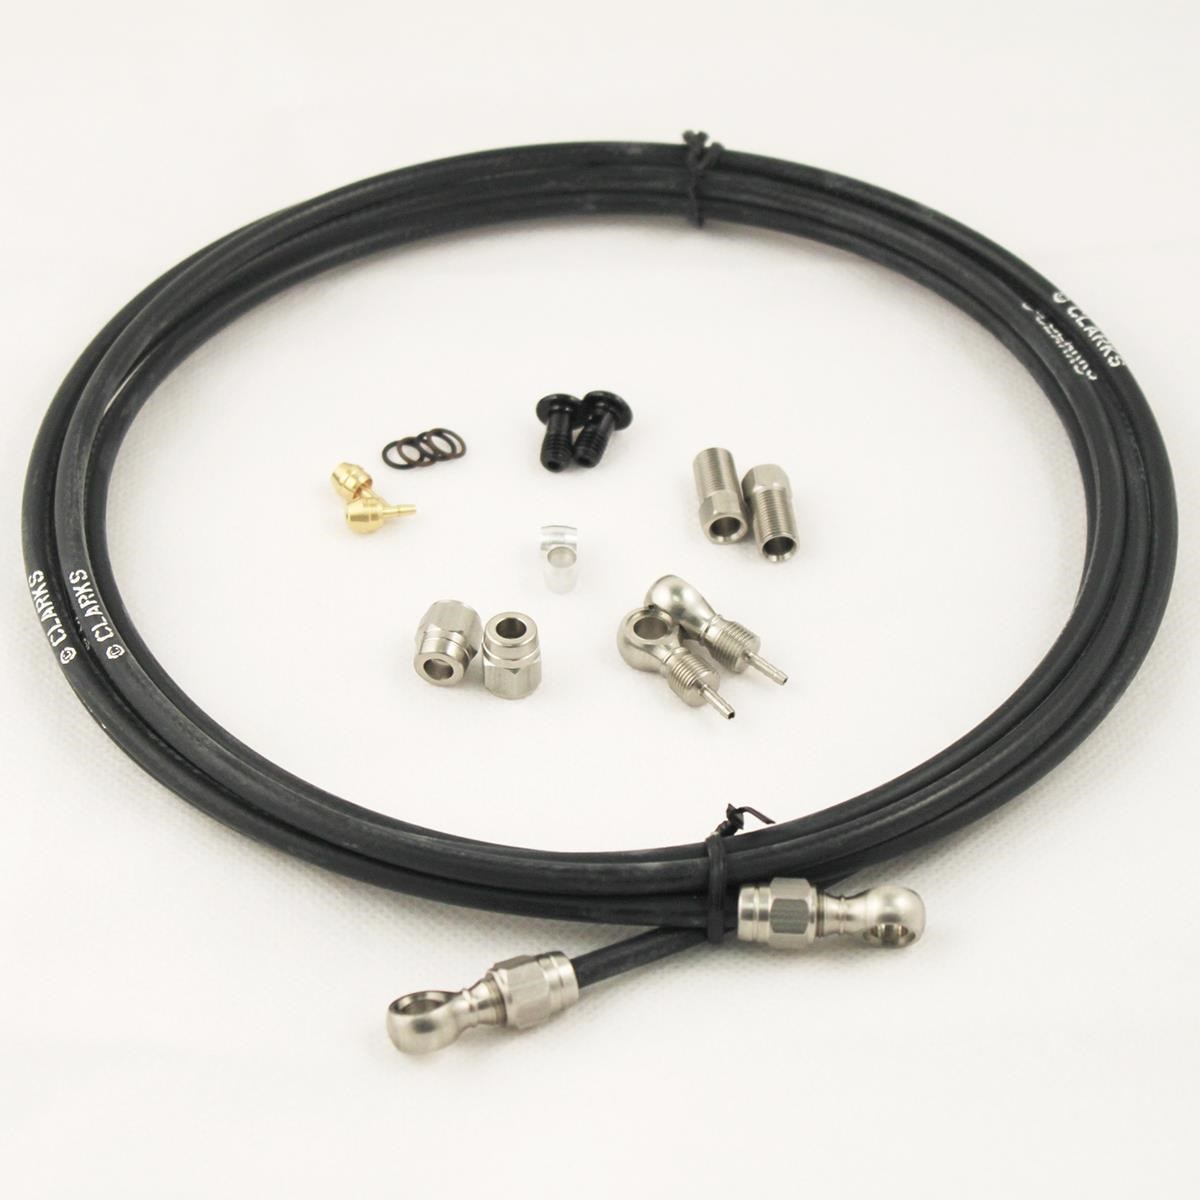 Clarks Hydraulic Hose Kit To Fit Shimano/Clarks System product image